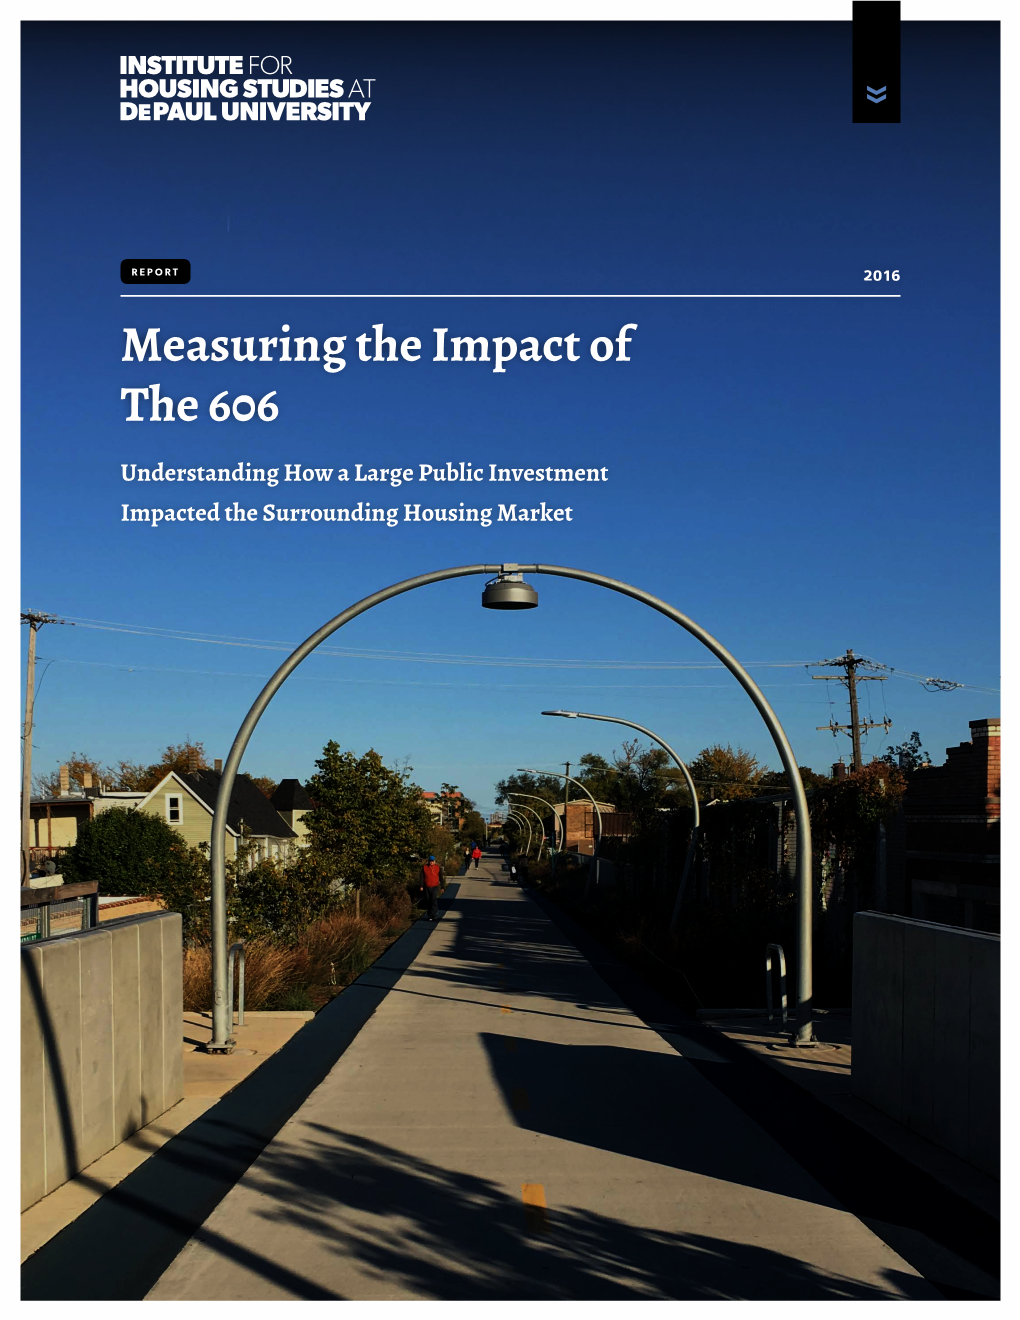 Measuring the Impact of the 606